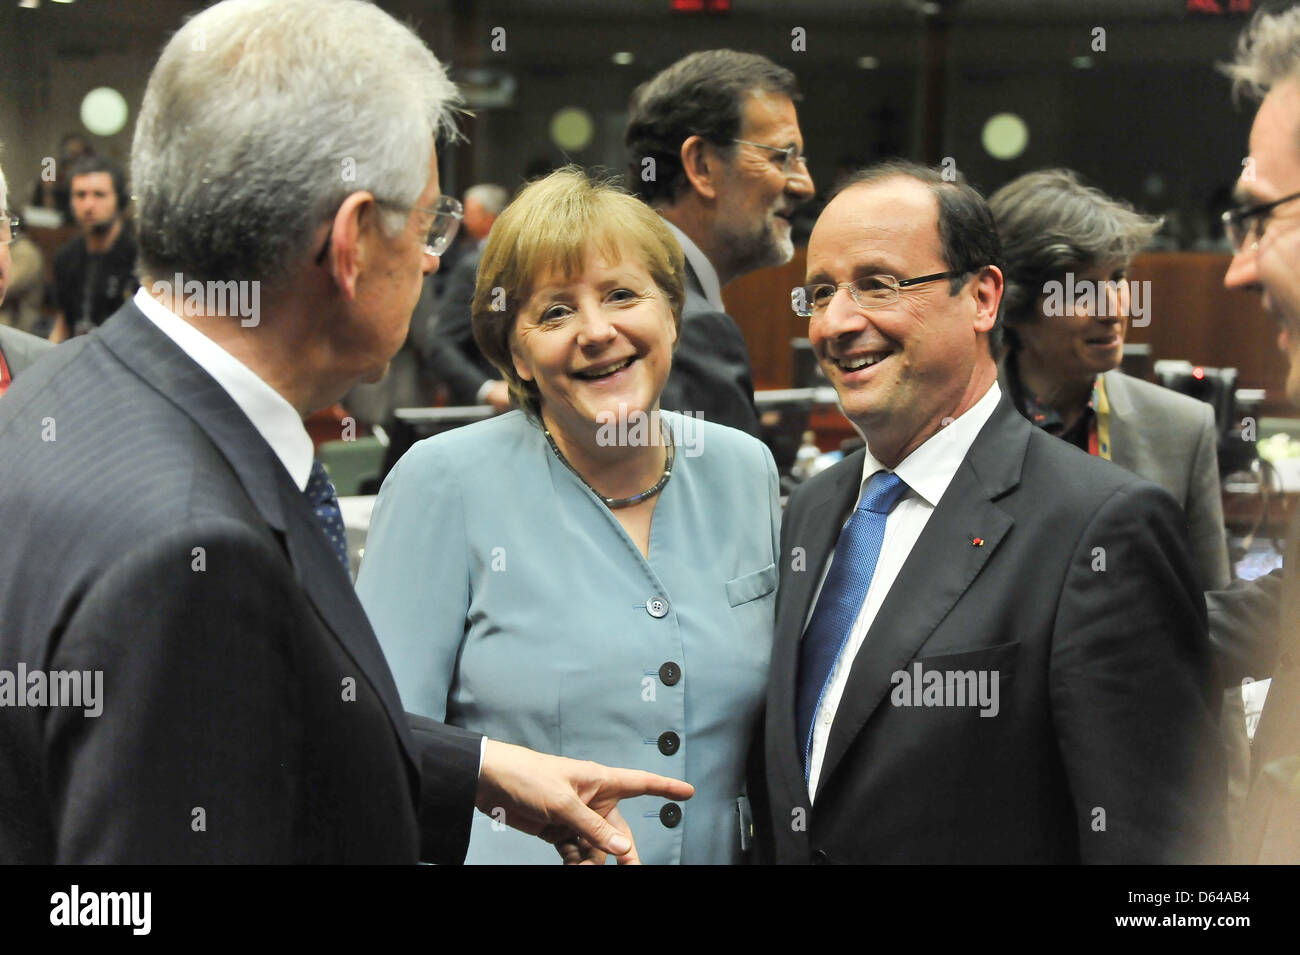 Italian minister of Finance Mario Monti (l), Germany's chancellor Angela Merkel and French president Francois Hollande greet during the EU summit in Brussels, Belgium, 23 May 2012. The heads of states and heads of governments of the 27 EU states have come together to speak about economical growth as a way out of the crisis. Topics discussed will be a possible tax on financial deals Stock Photo